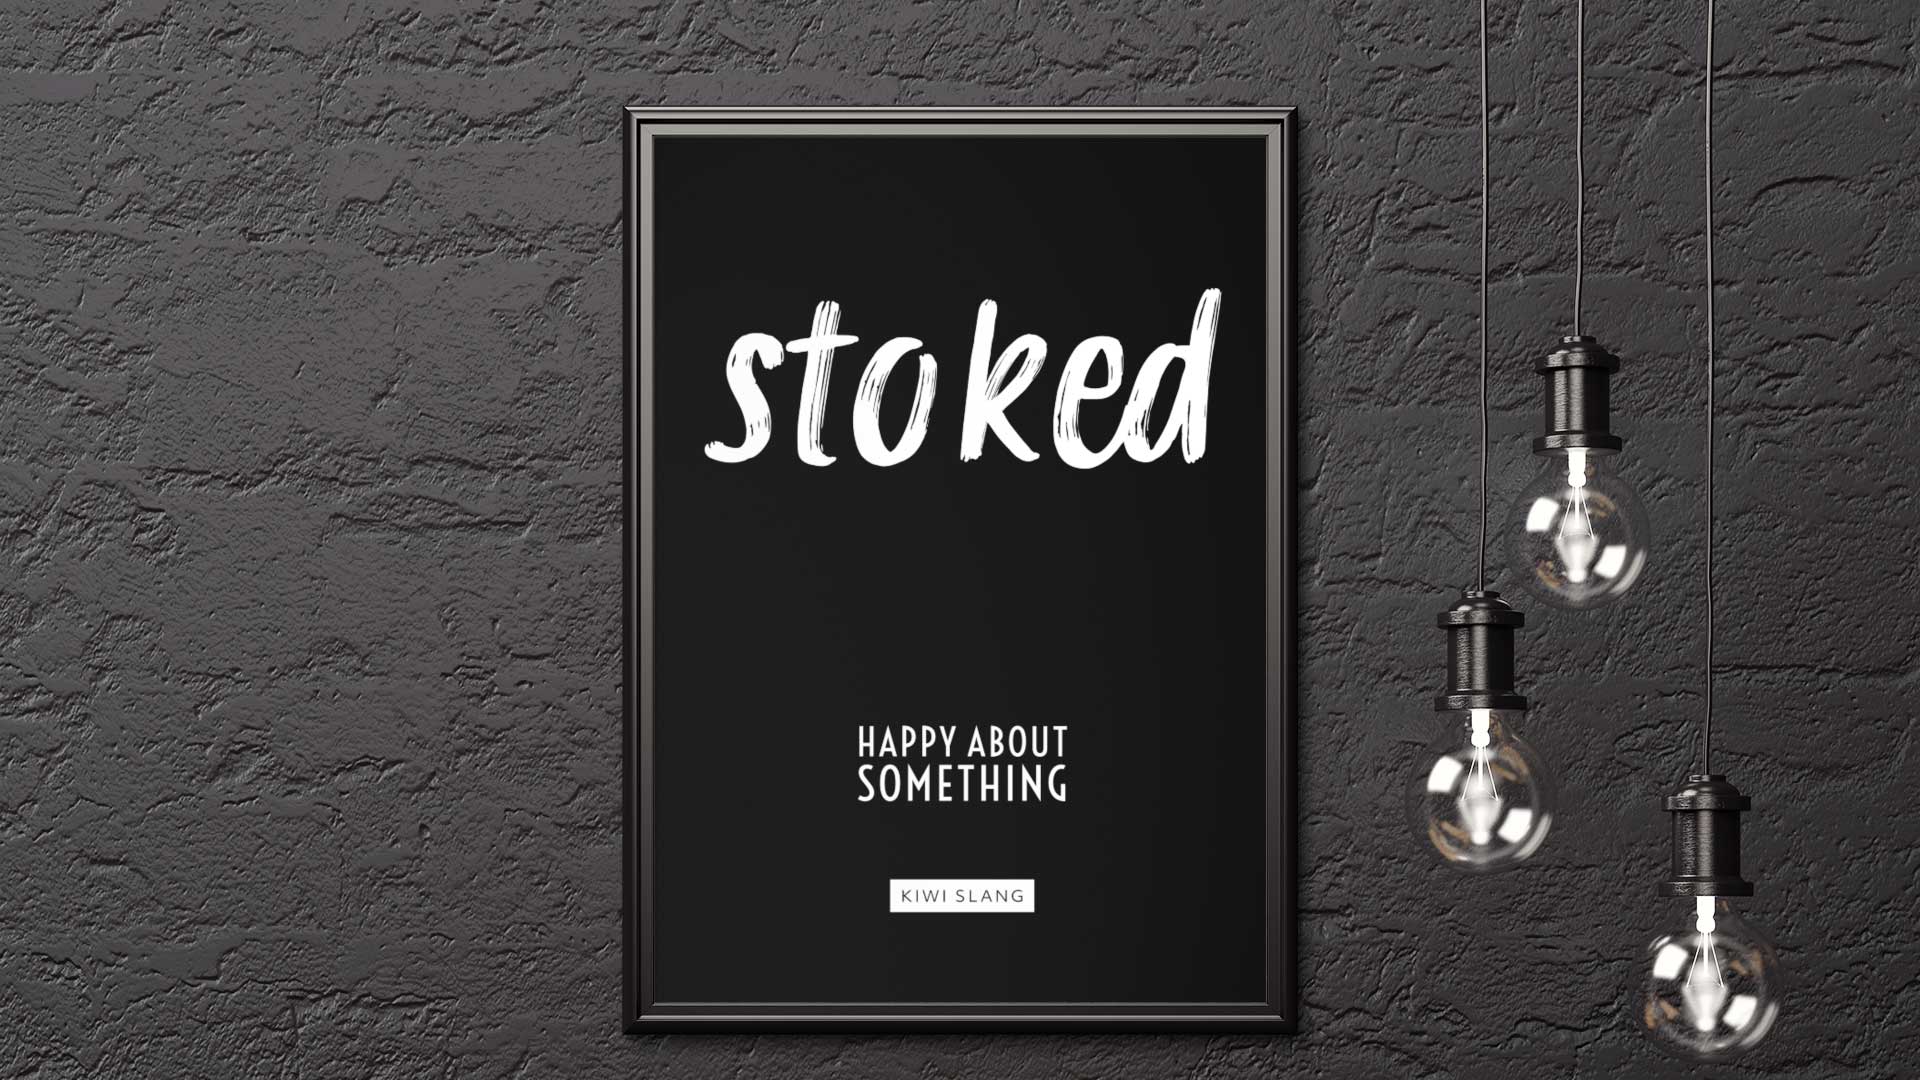 Meaning of Stoked - Original Kiwi Slang Terms & Definitions.